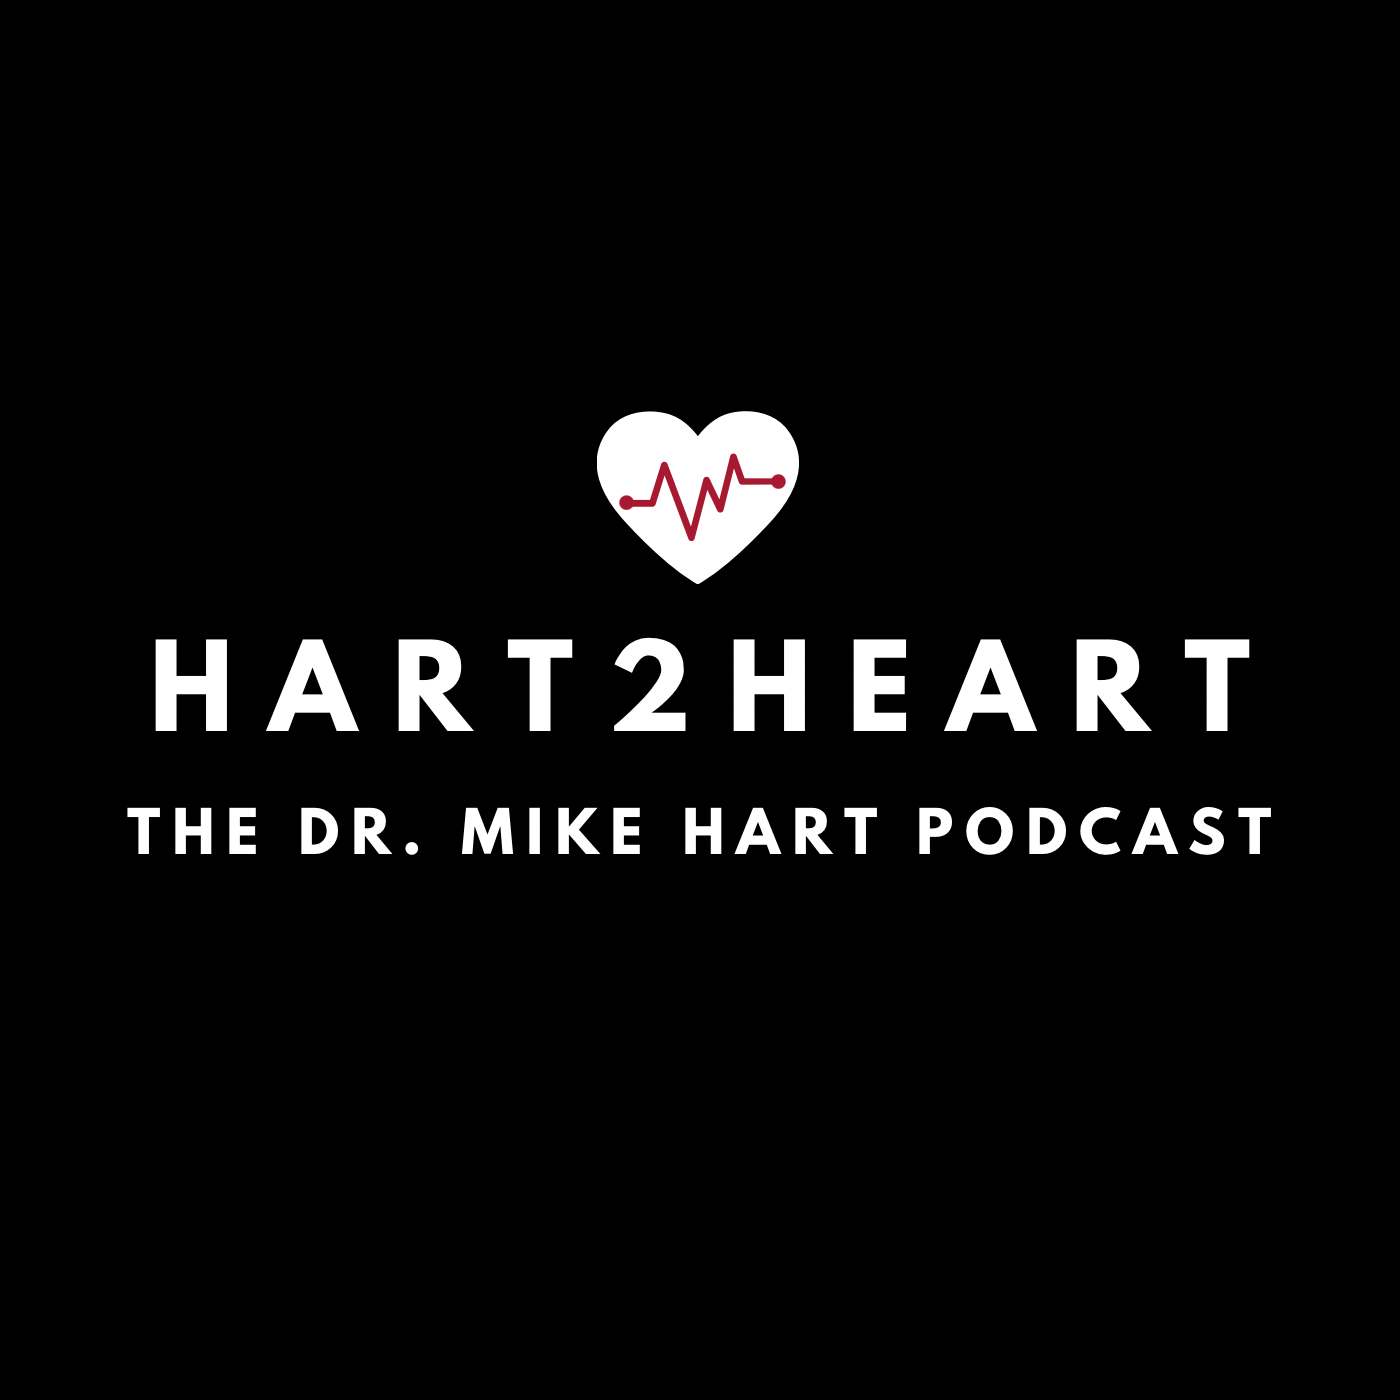 HART2HEART: The Dr. Mike Hart Podcast